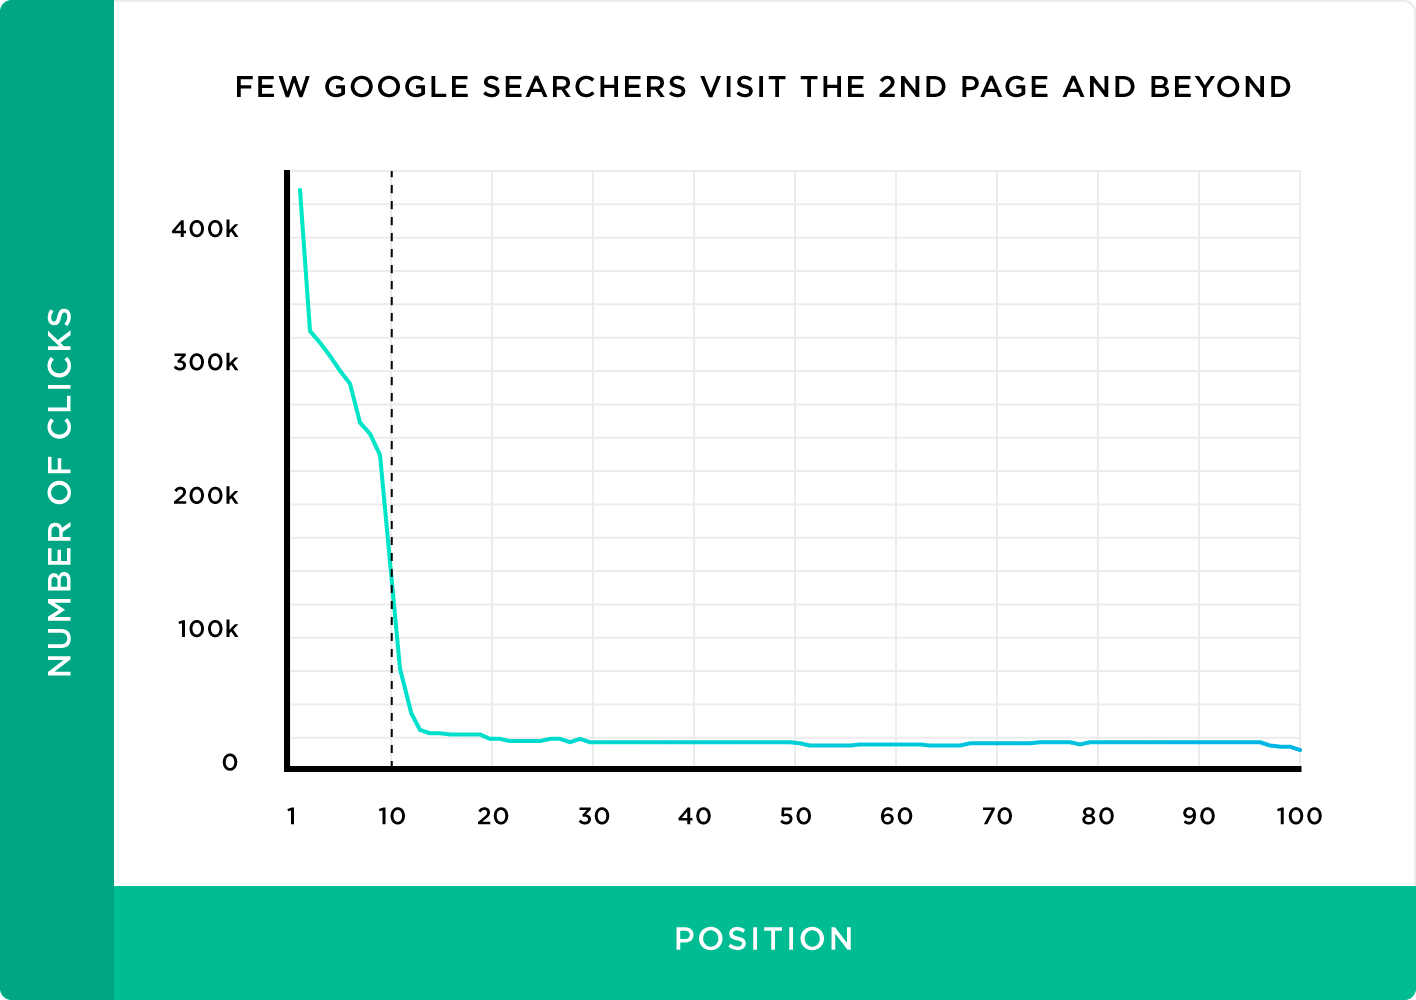 Few Google searchers visit the 2nd page and beyond